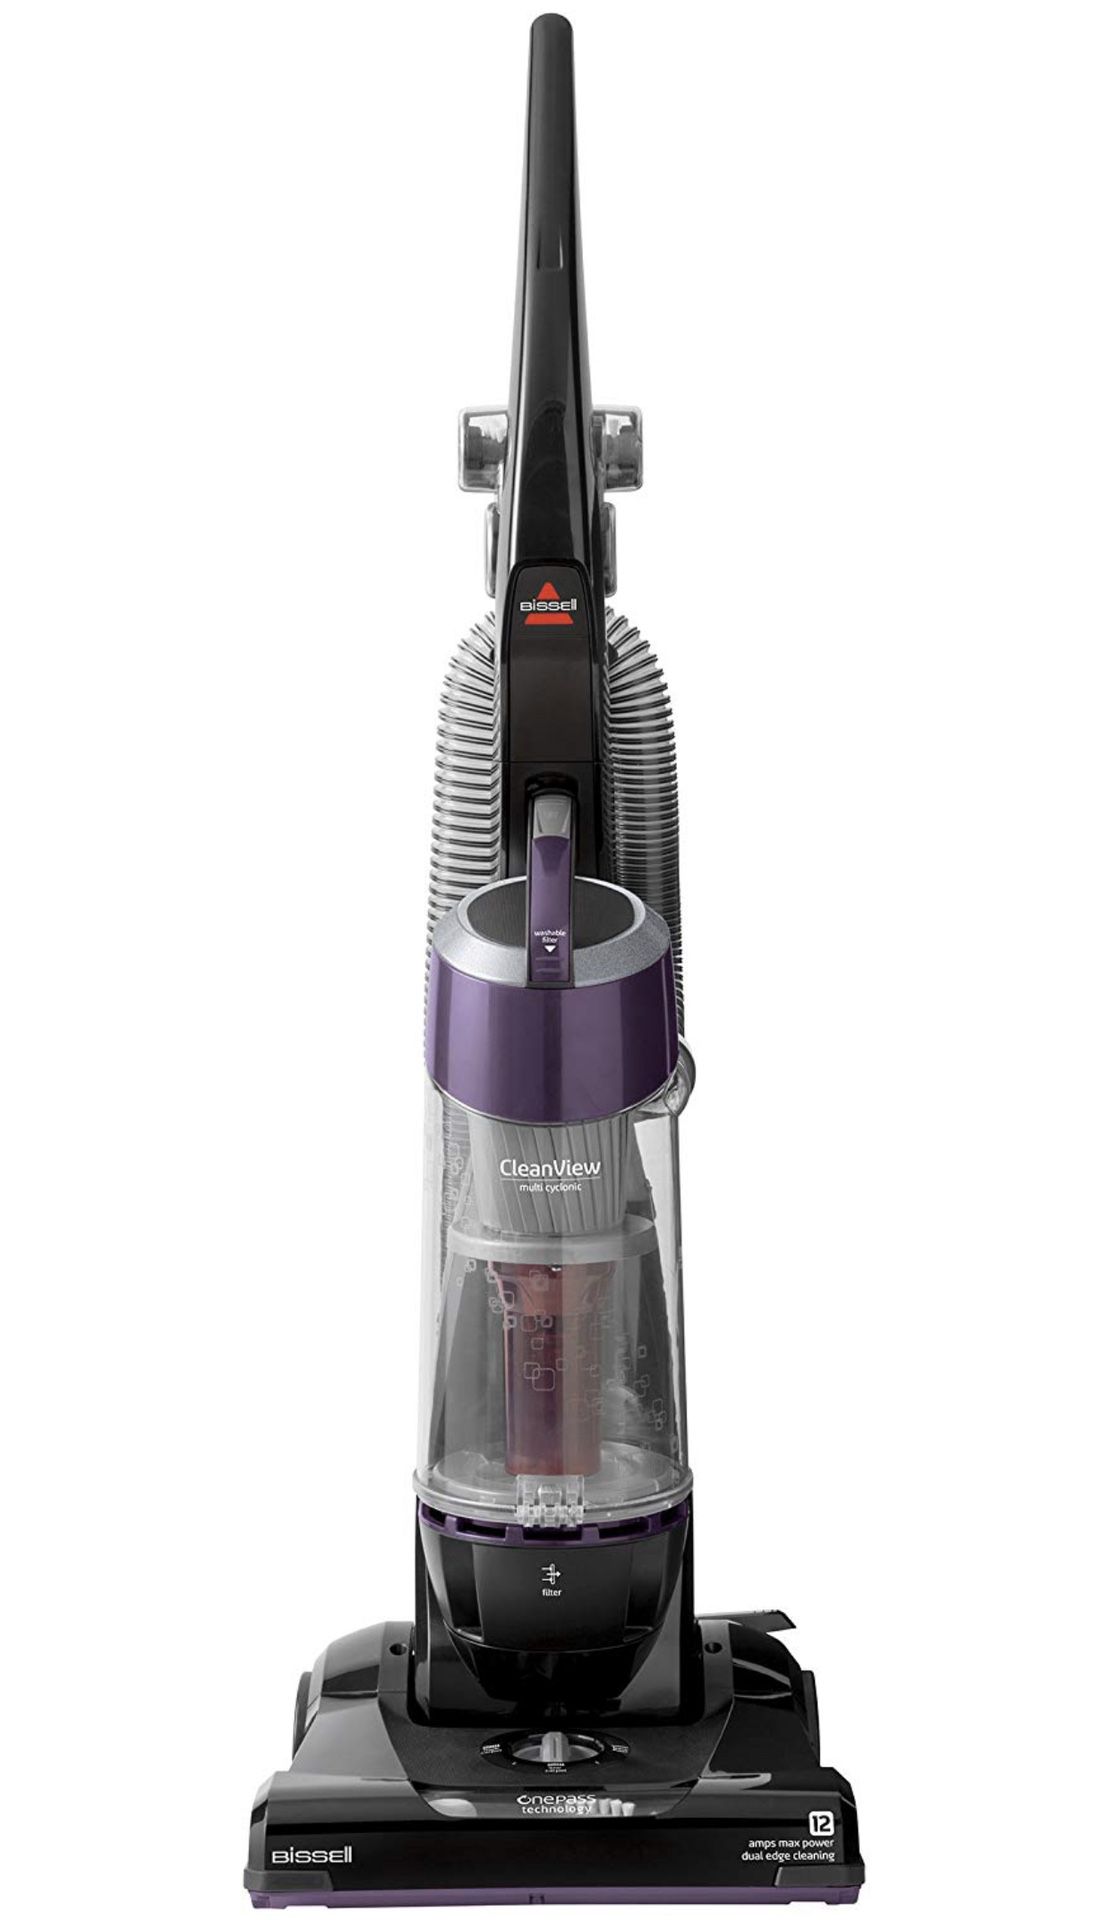 Bissell CleanView Vaccum With onepass Technology 9595 - Purple, Washable Filter